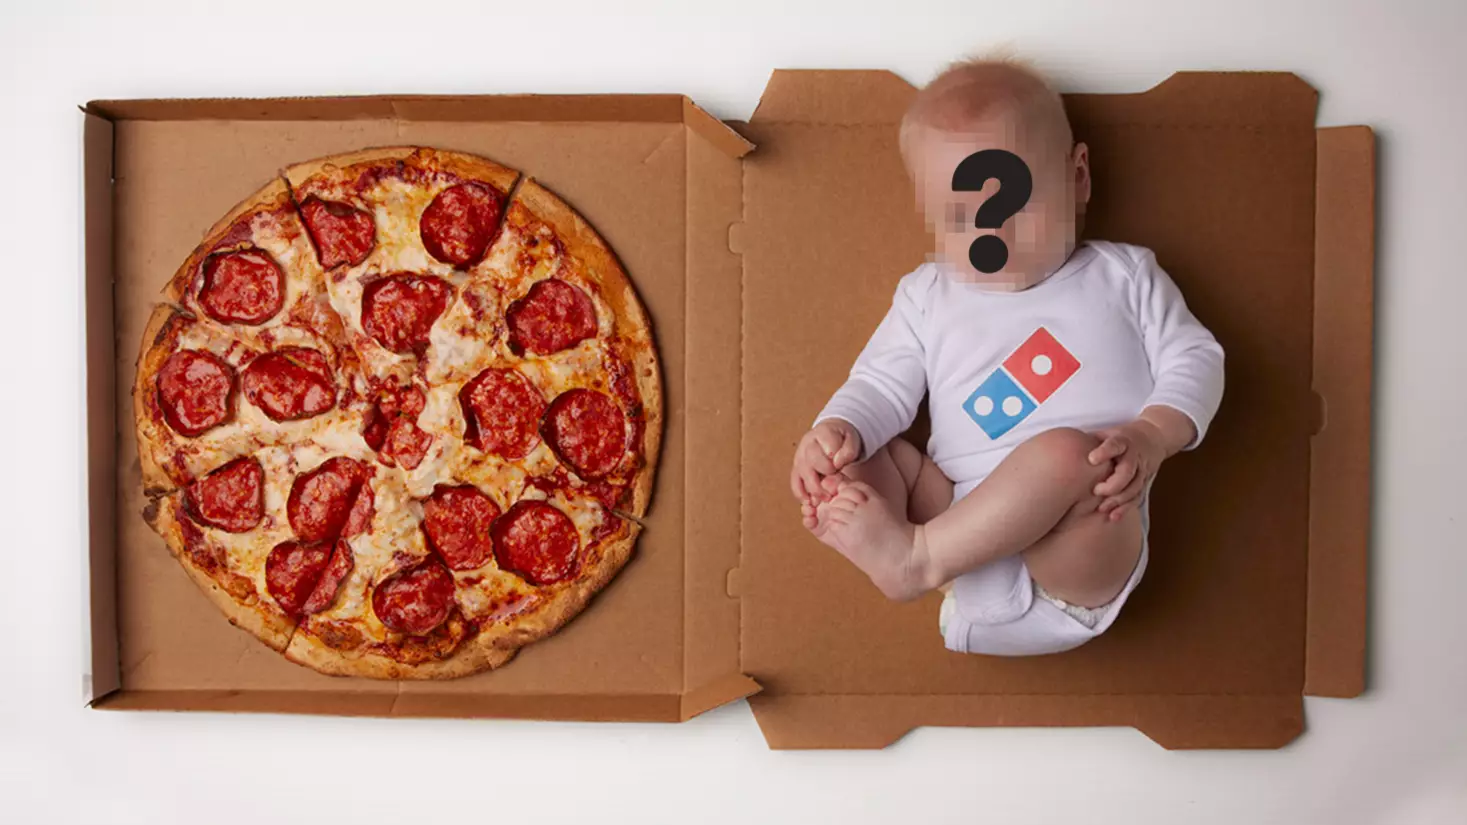 Domino’s Australia Is Giving Away 60 Years’ Worth Of Free Pizza To Someone Named Dom